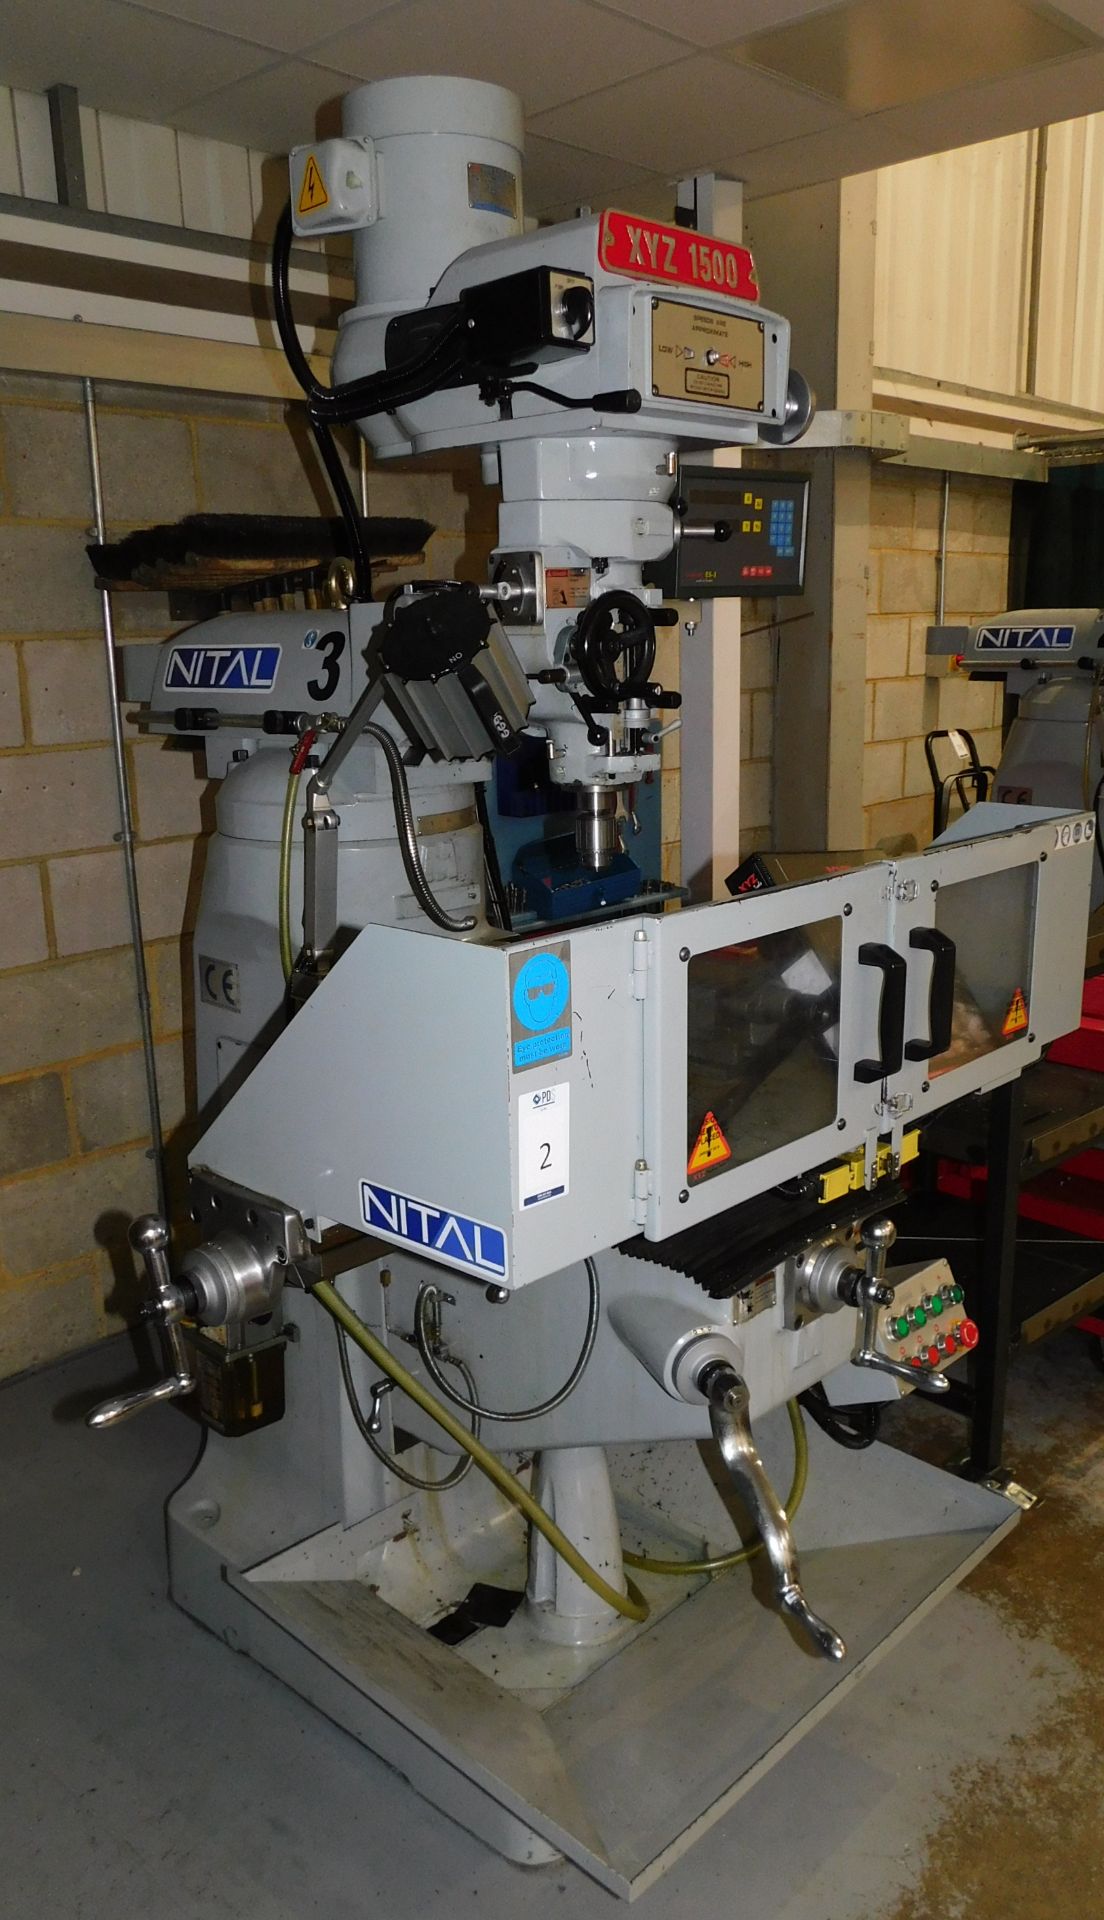 XYZ 1500 Turret Mill (2015), serial number 104011, 3 HP Variable Speed Head, 1069 x 228mm Table & - Image 2 of 8